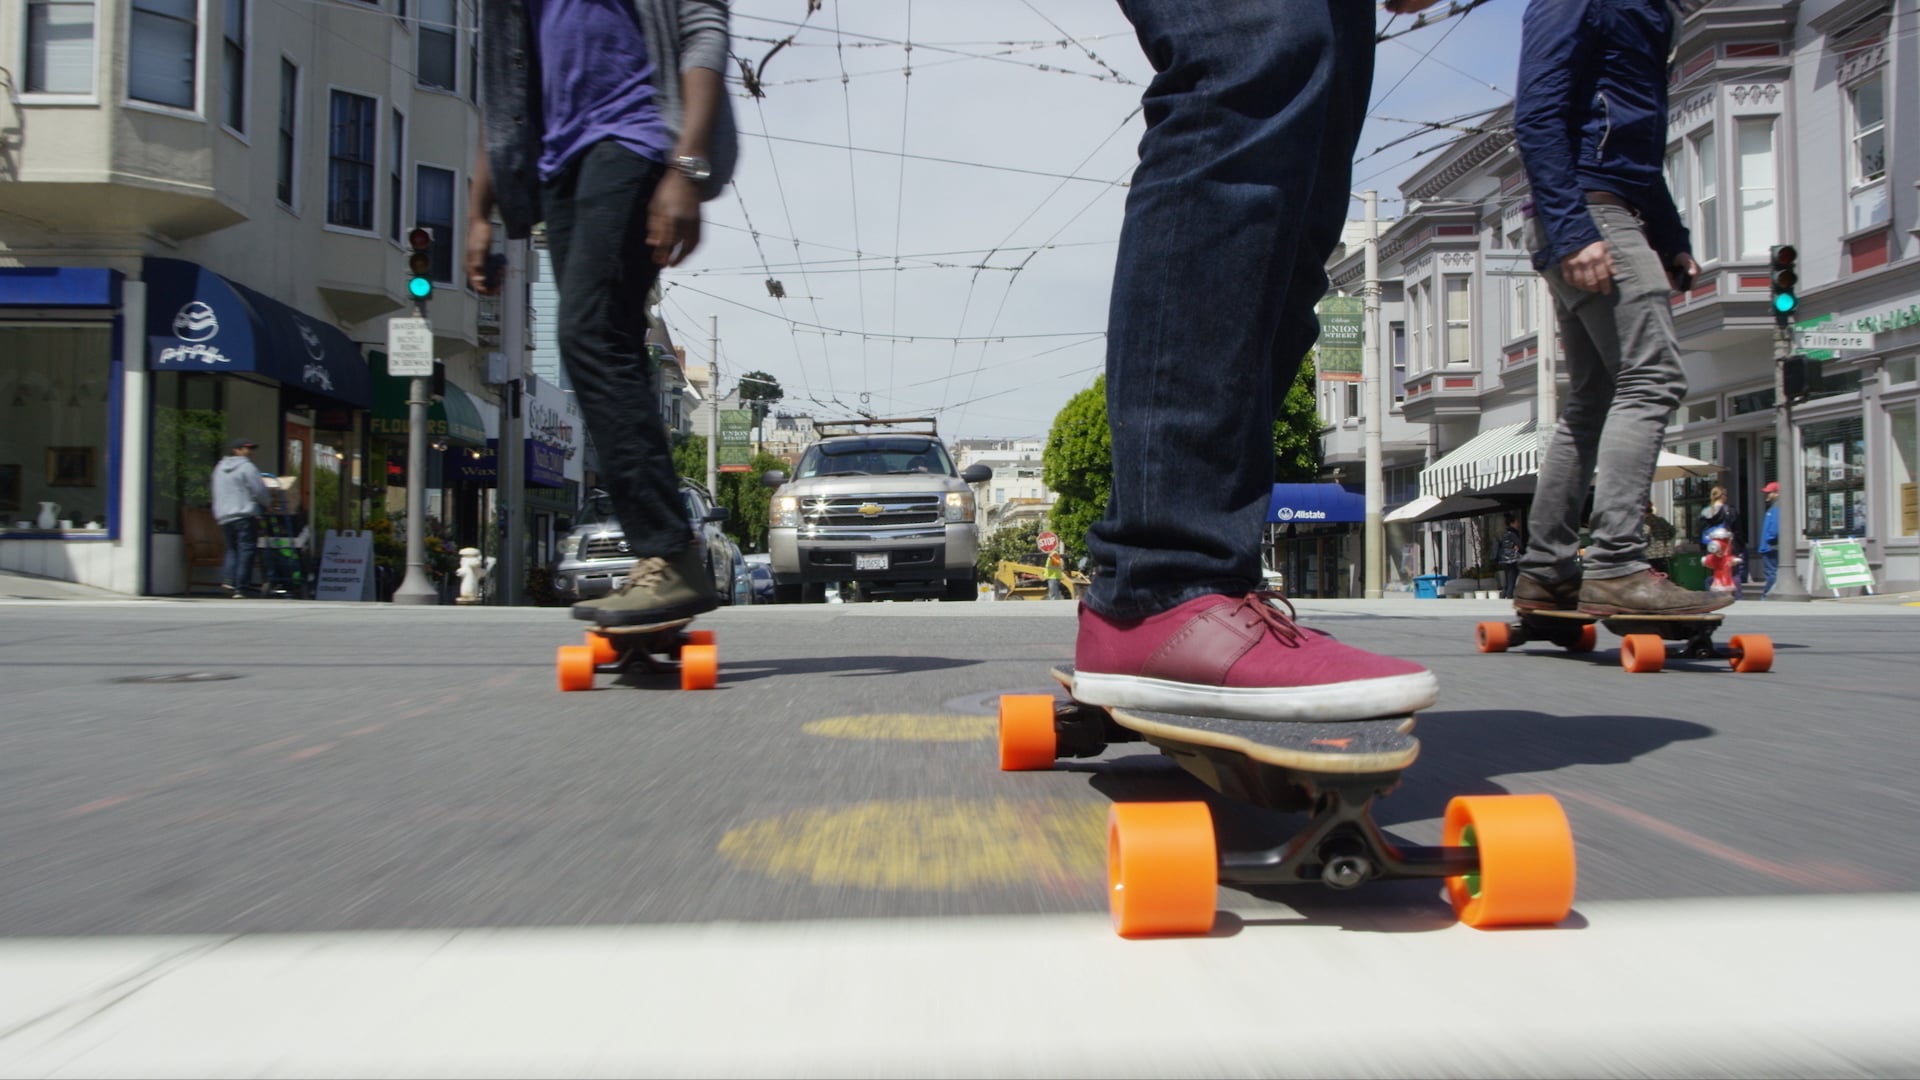 COMMERCIAL WORK: Boosted Boards